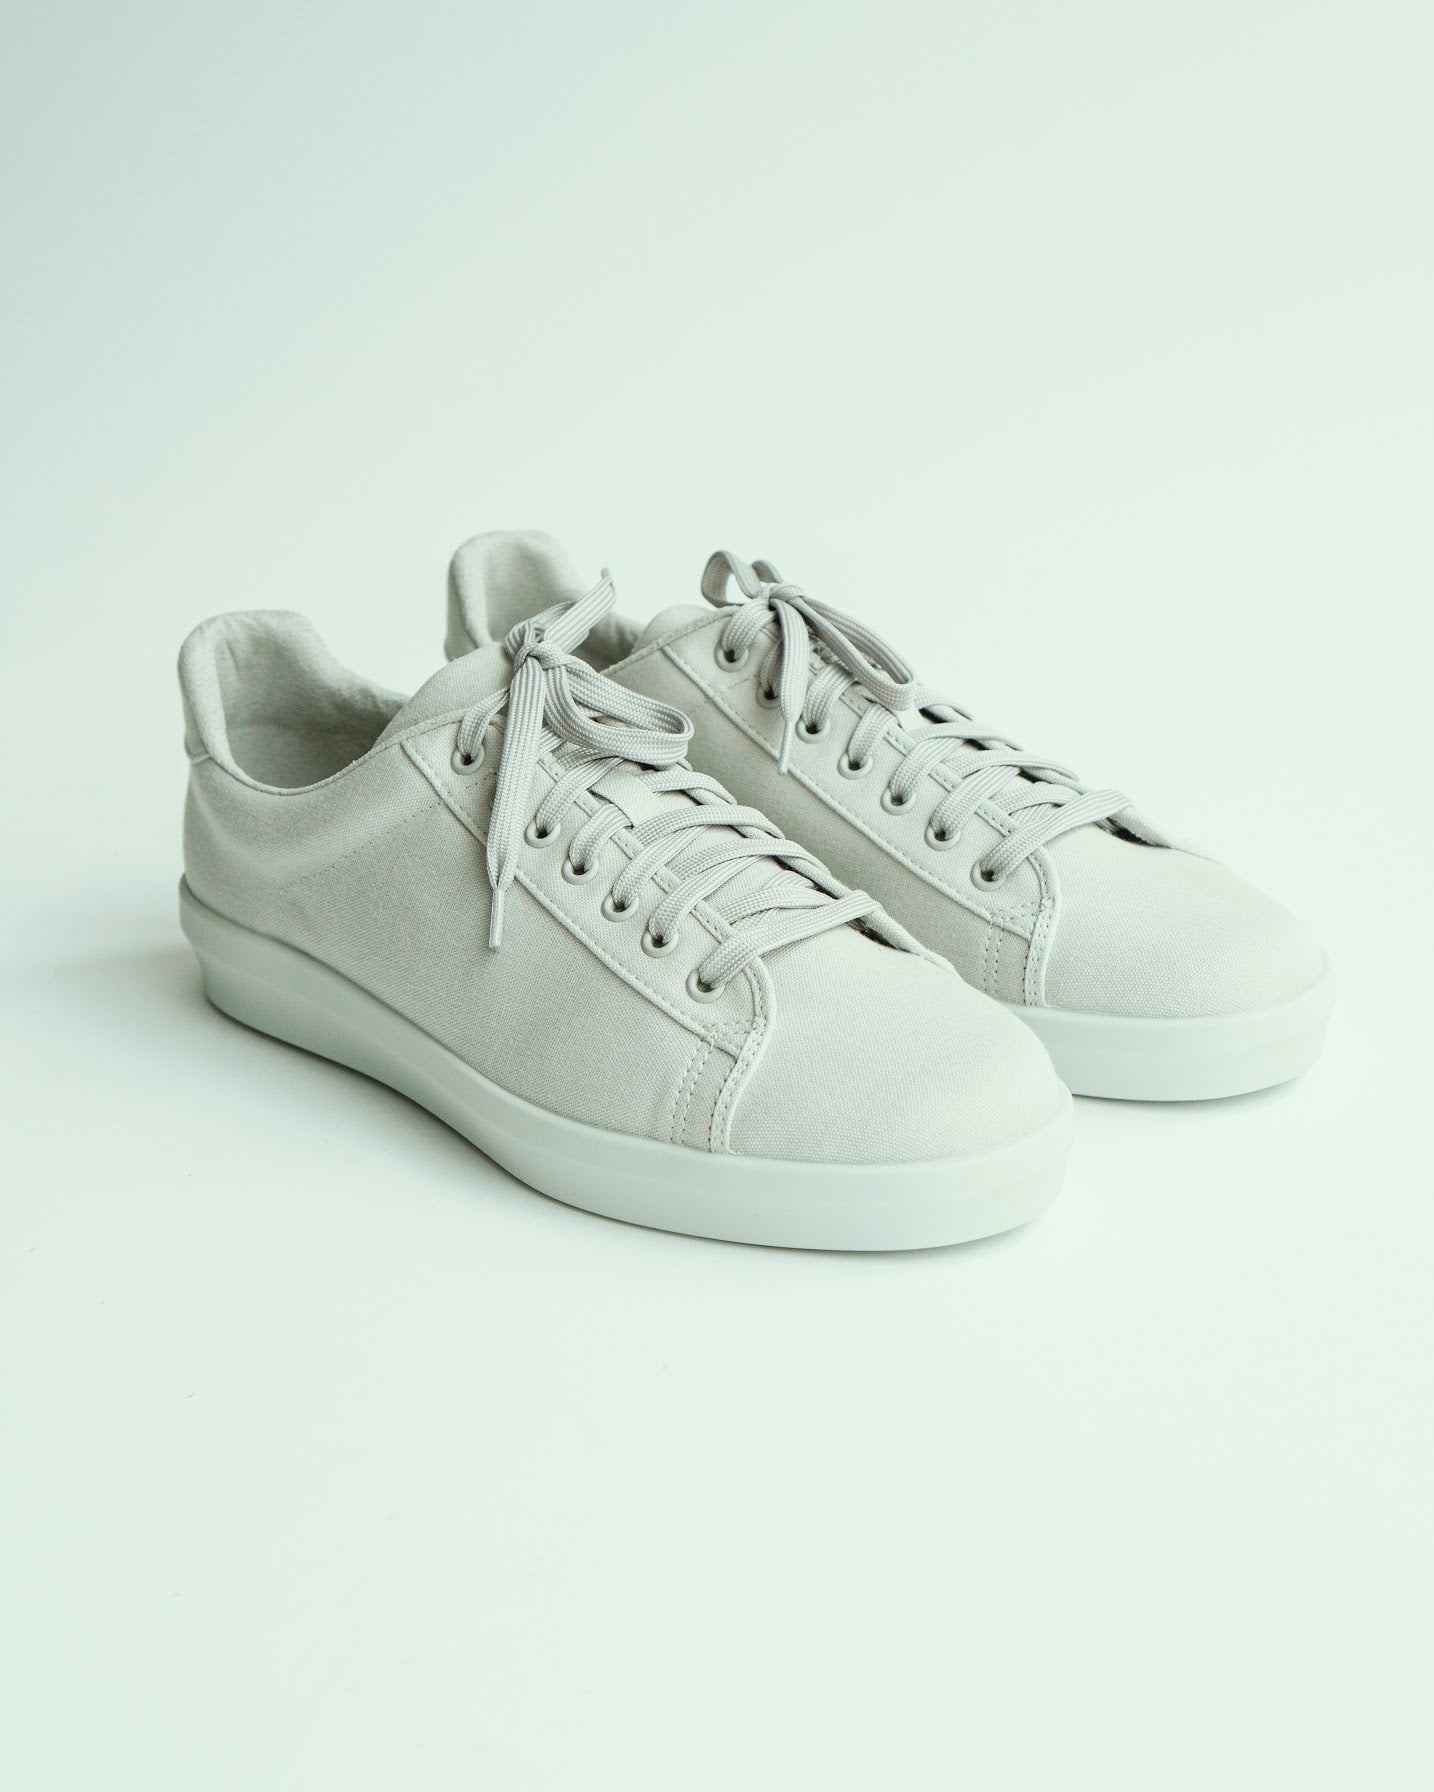 Moonstar Raly Vul Sneakers | The Signet Store